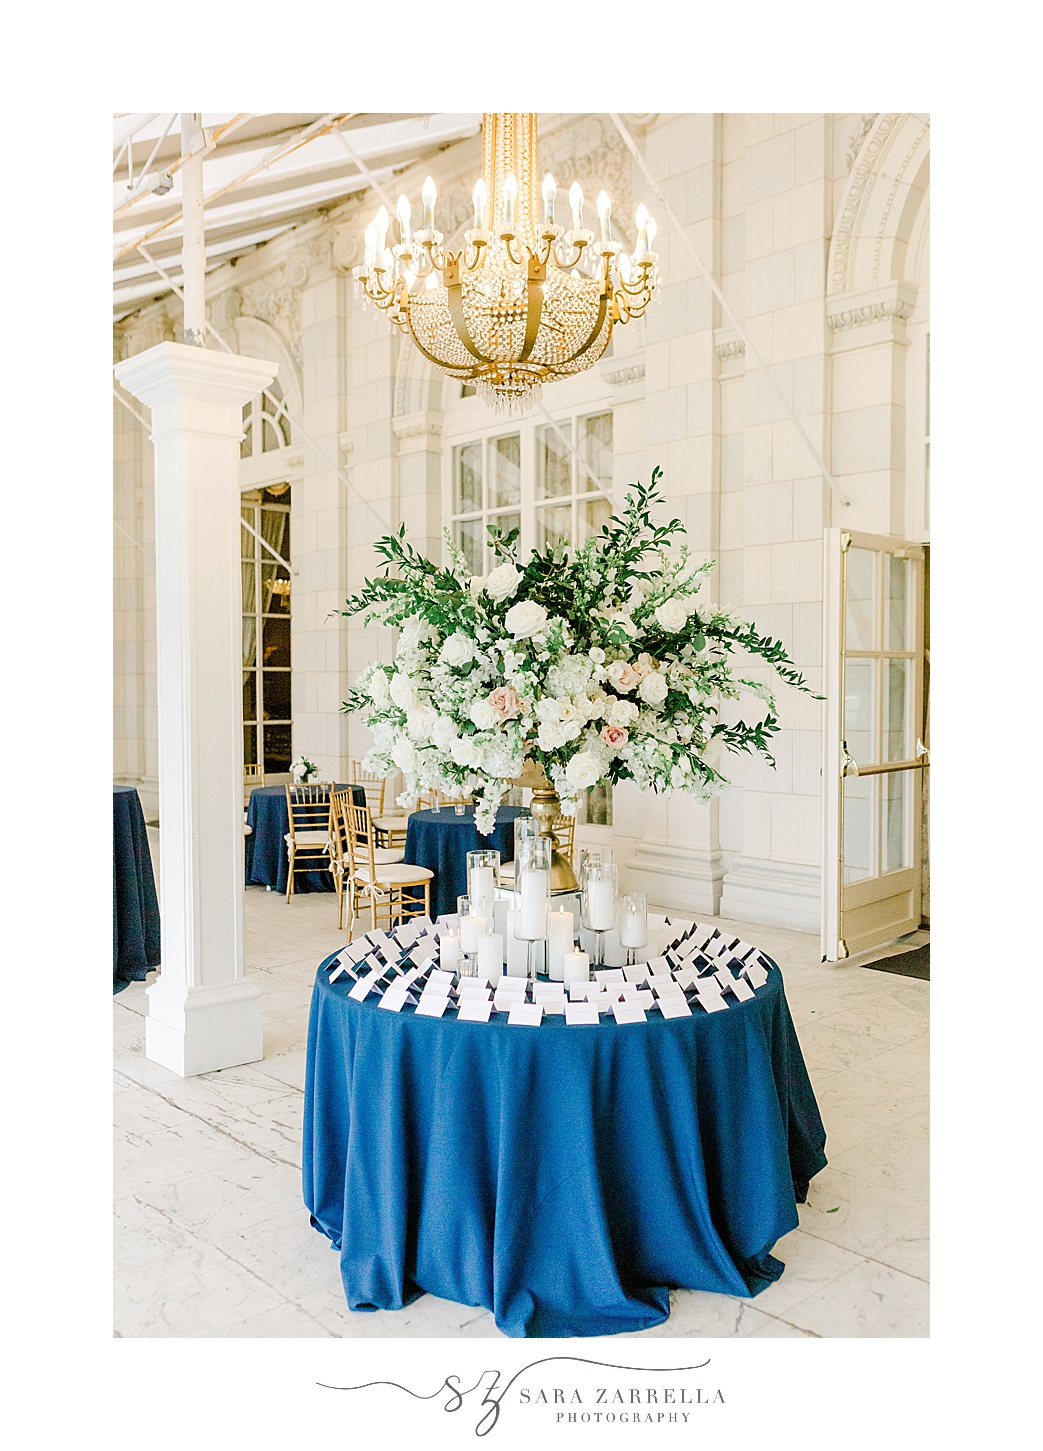 welcome table with escort cards on blue table cloth 